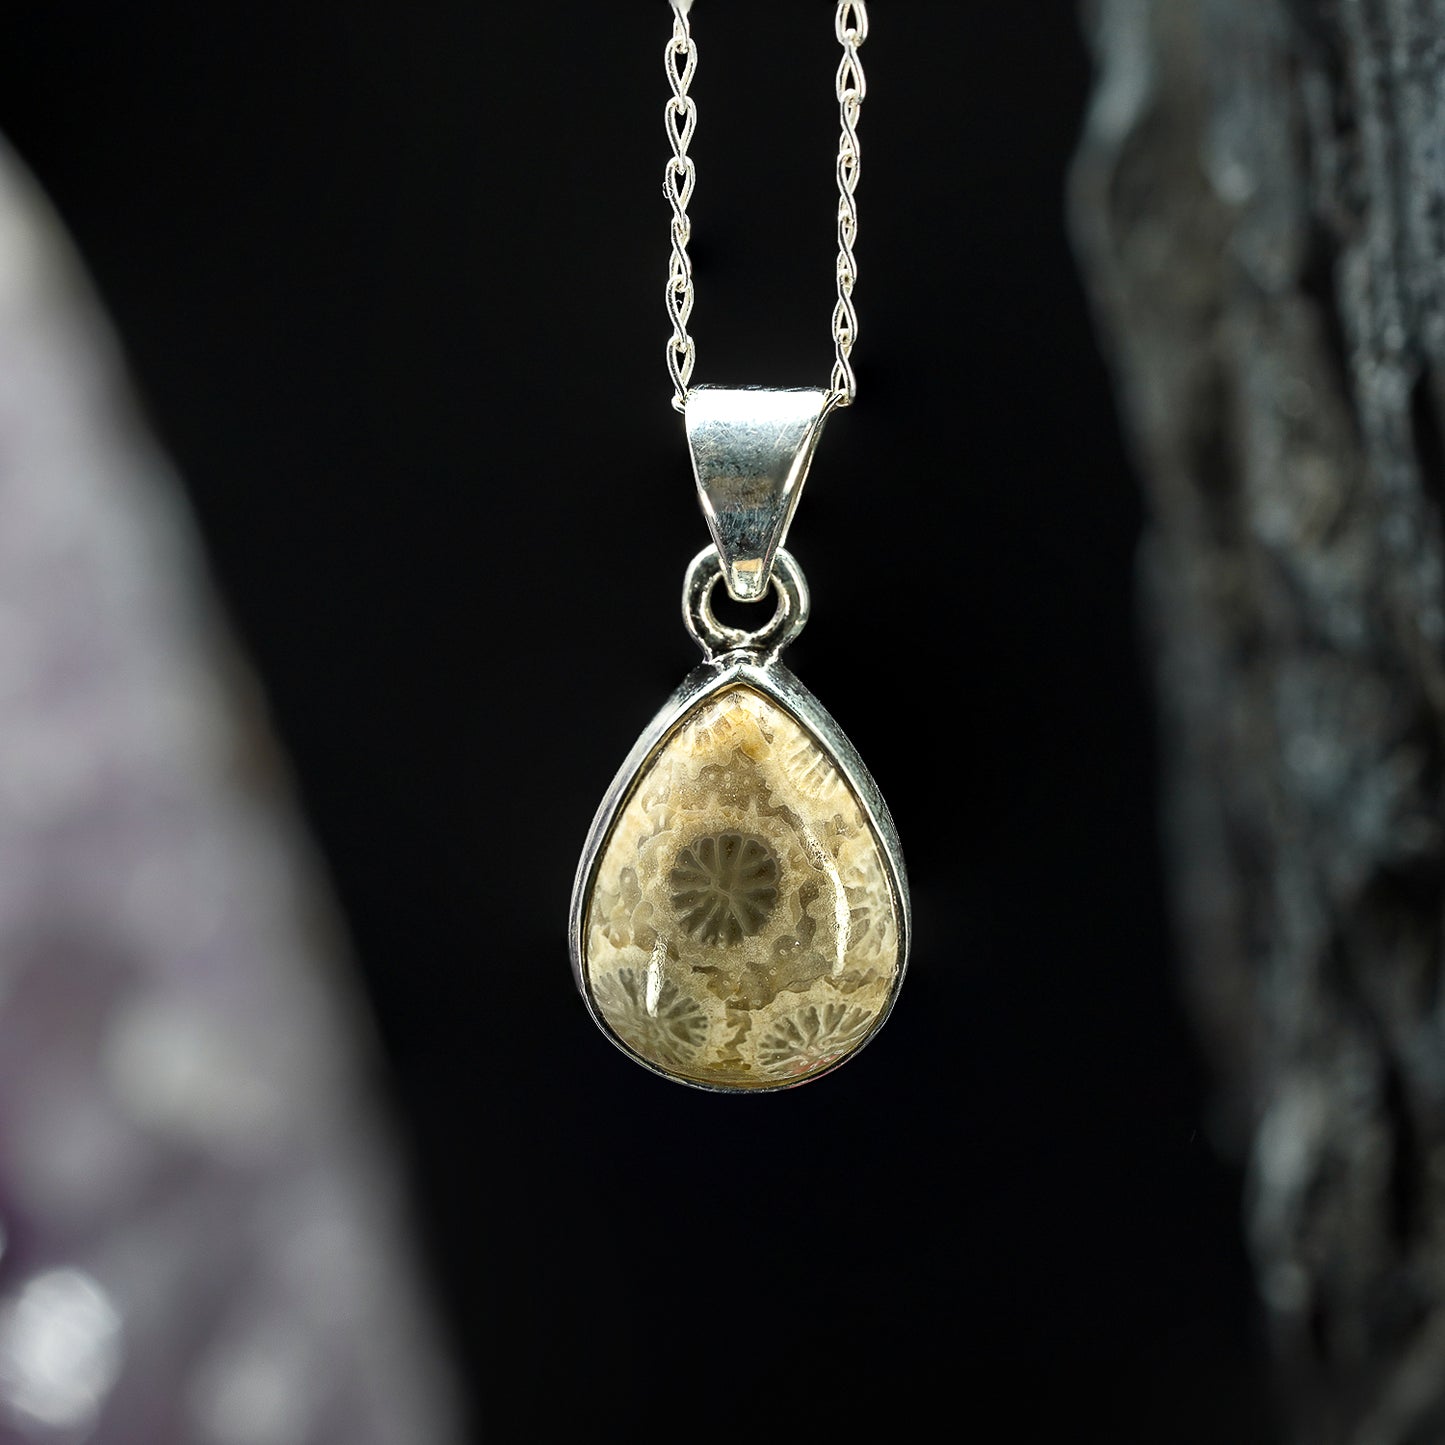 Fossil Coral Necklace